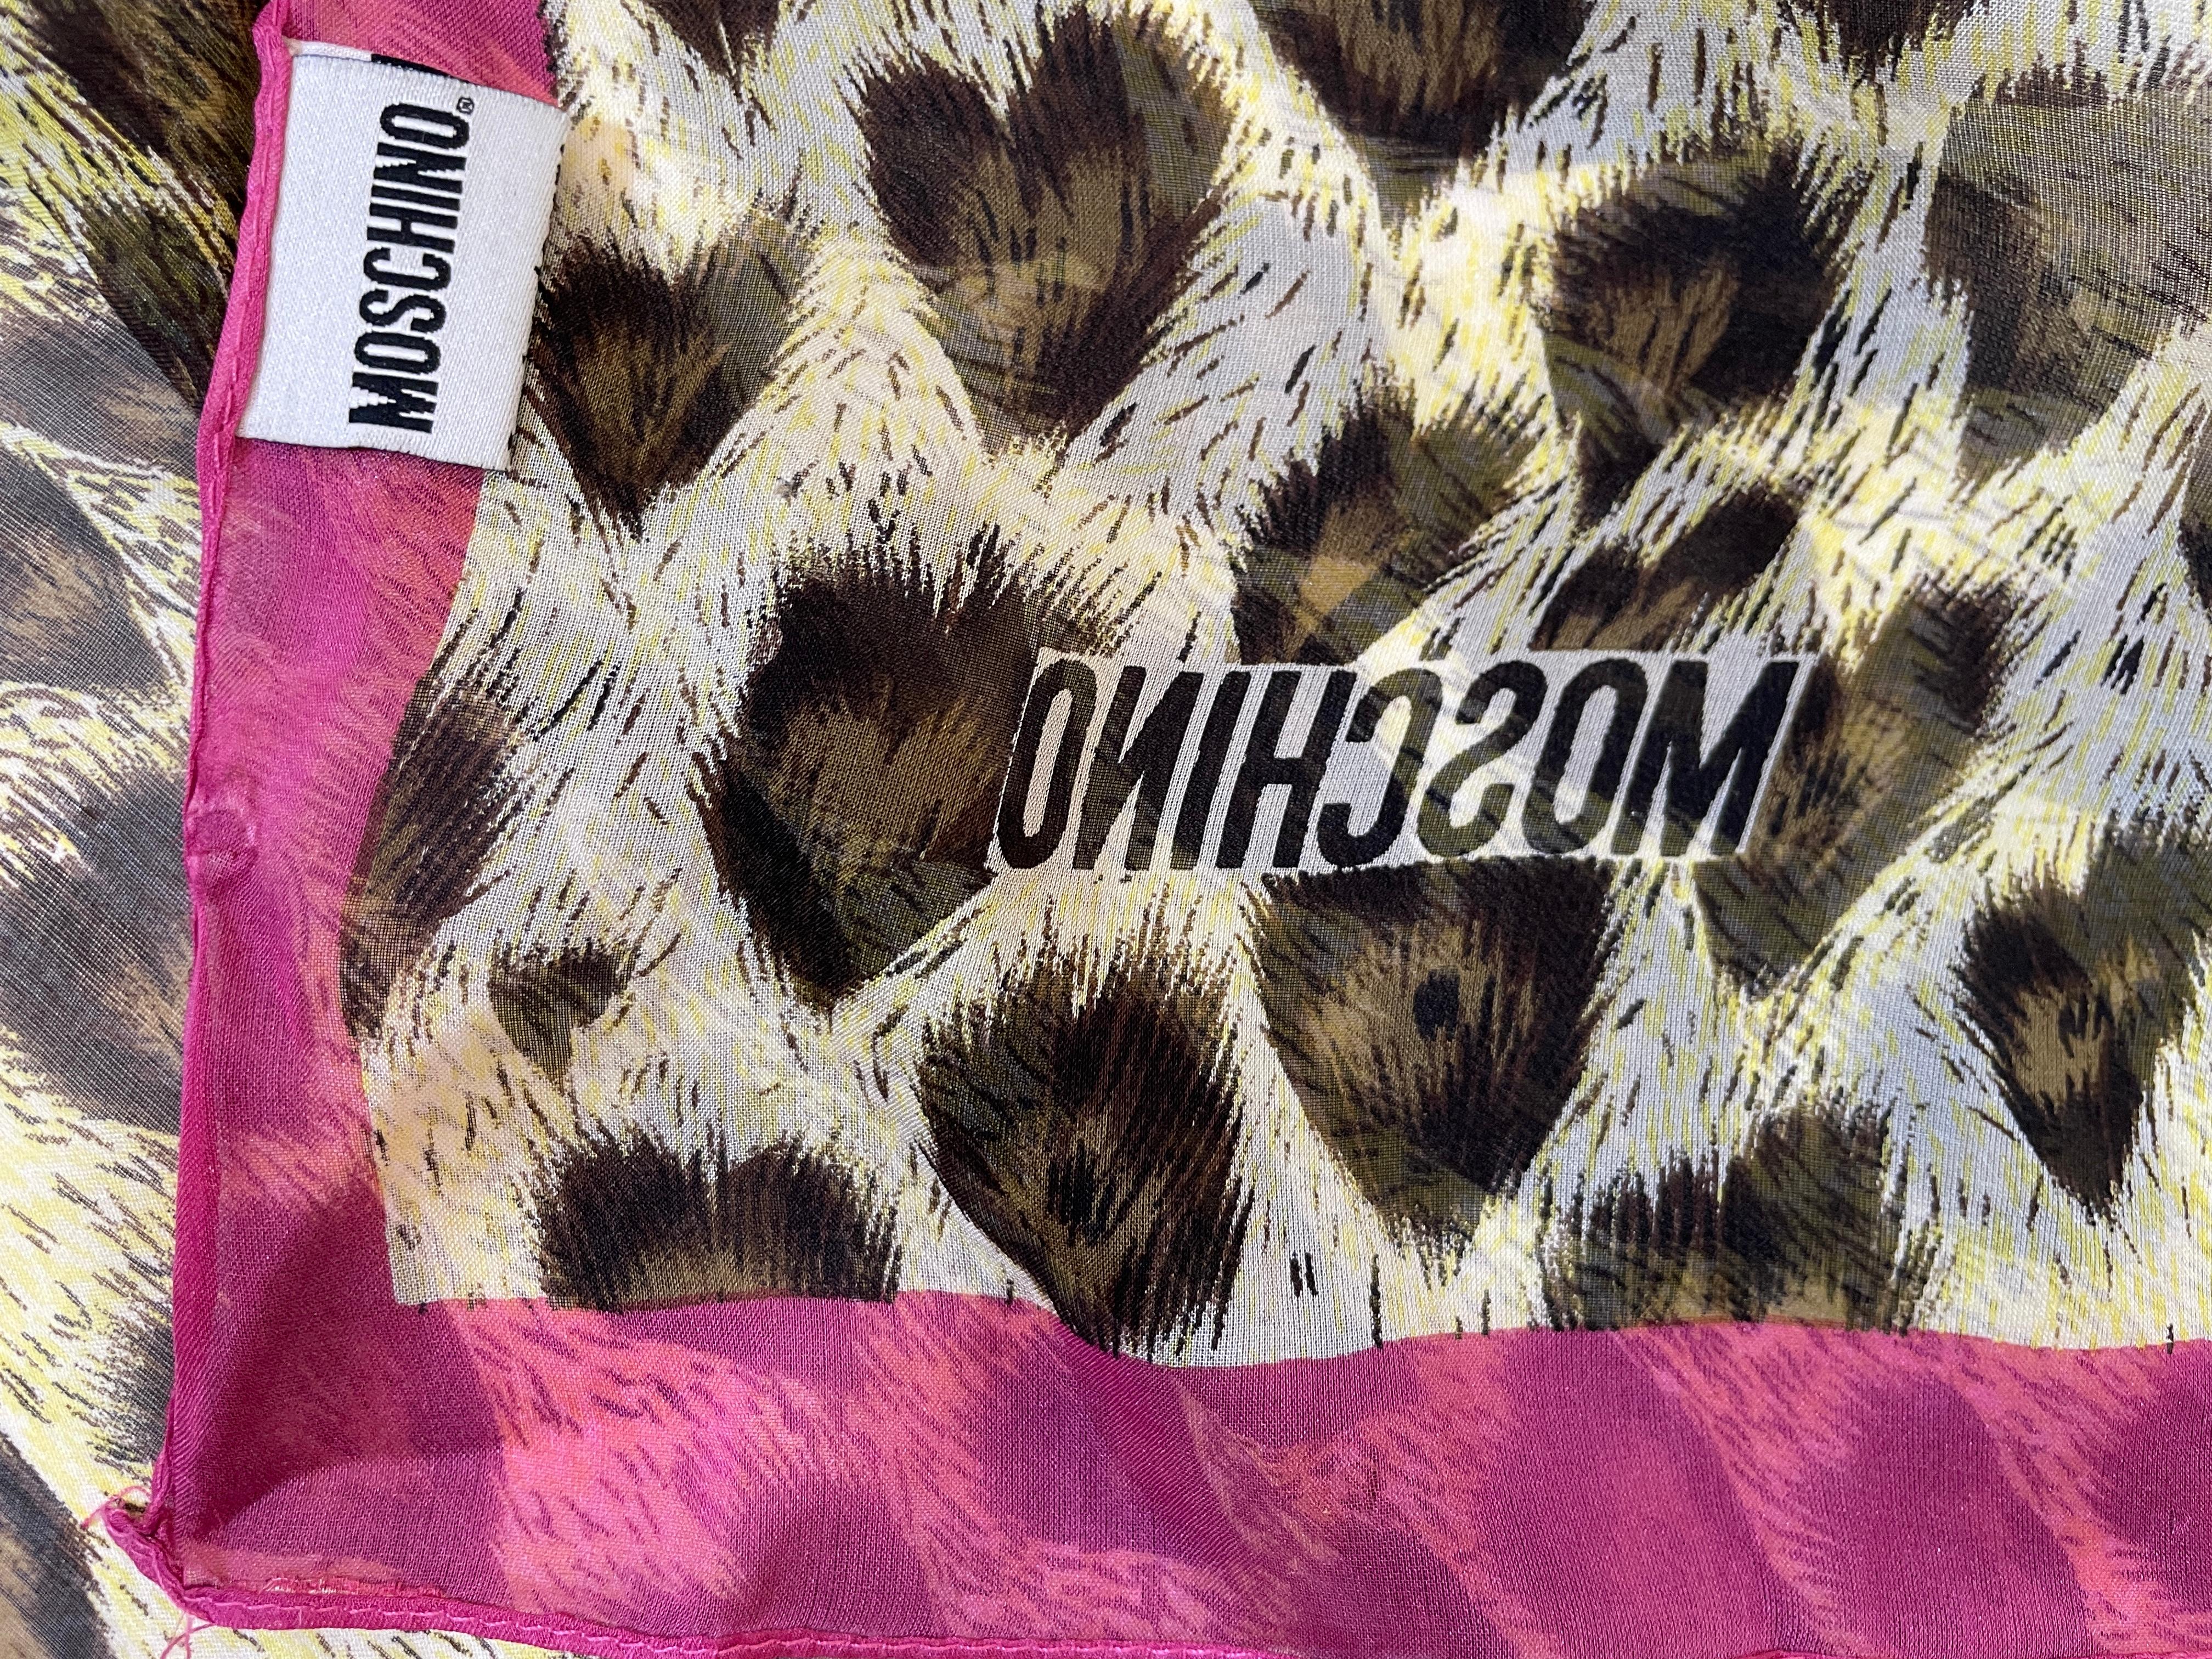 Moschino Animal Print Silk Scarf Made In Italy Pink And Brown 1990s Head Wrap For Sale 3